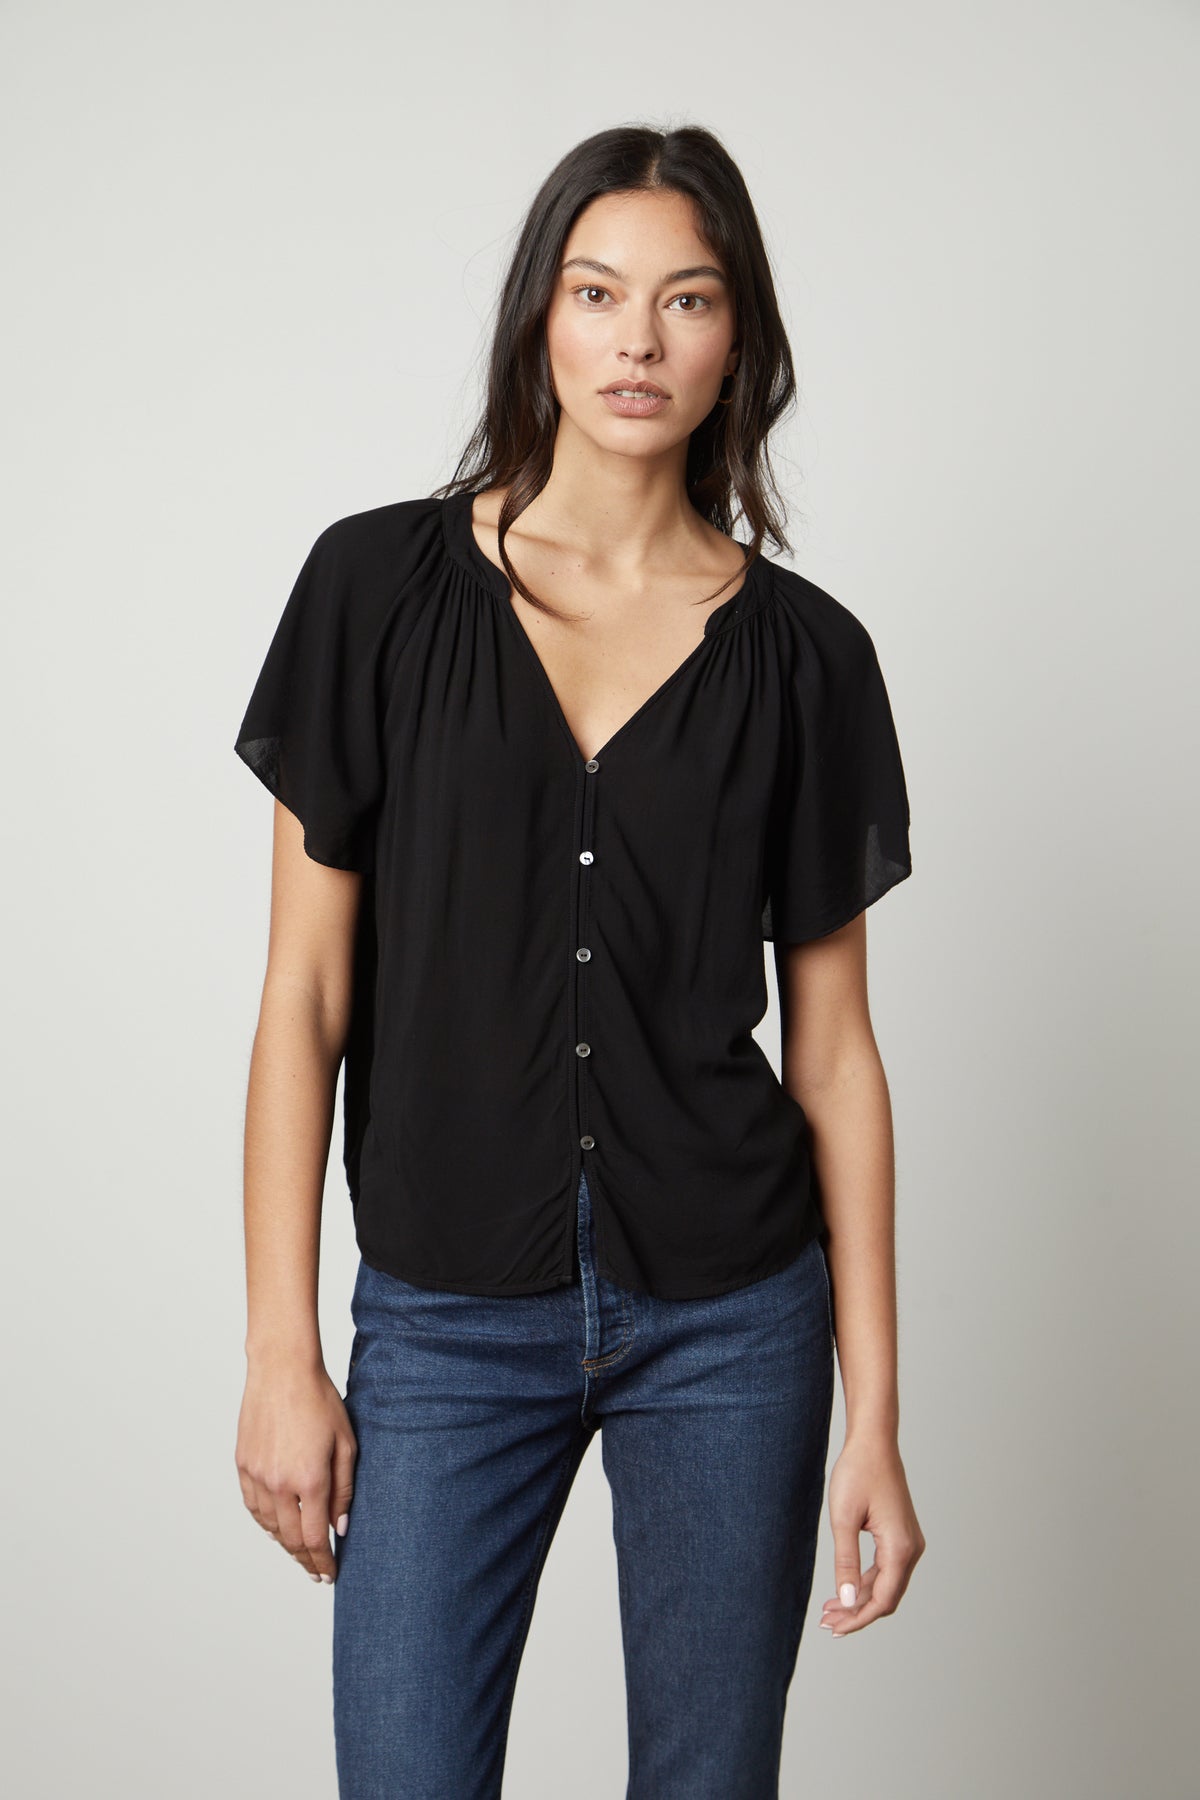 The model is wearing jeans and a Velvet by Graham & Spencer HARLEY FLUTTER SLEEVE TOP in black-26727735492801